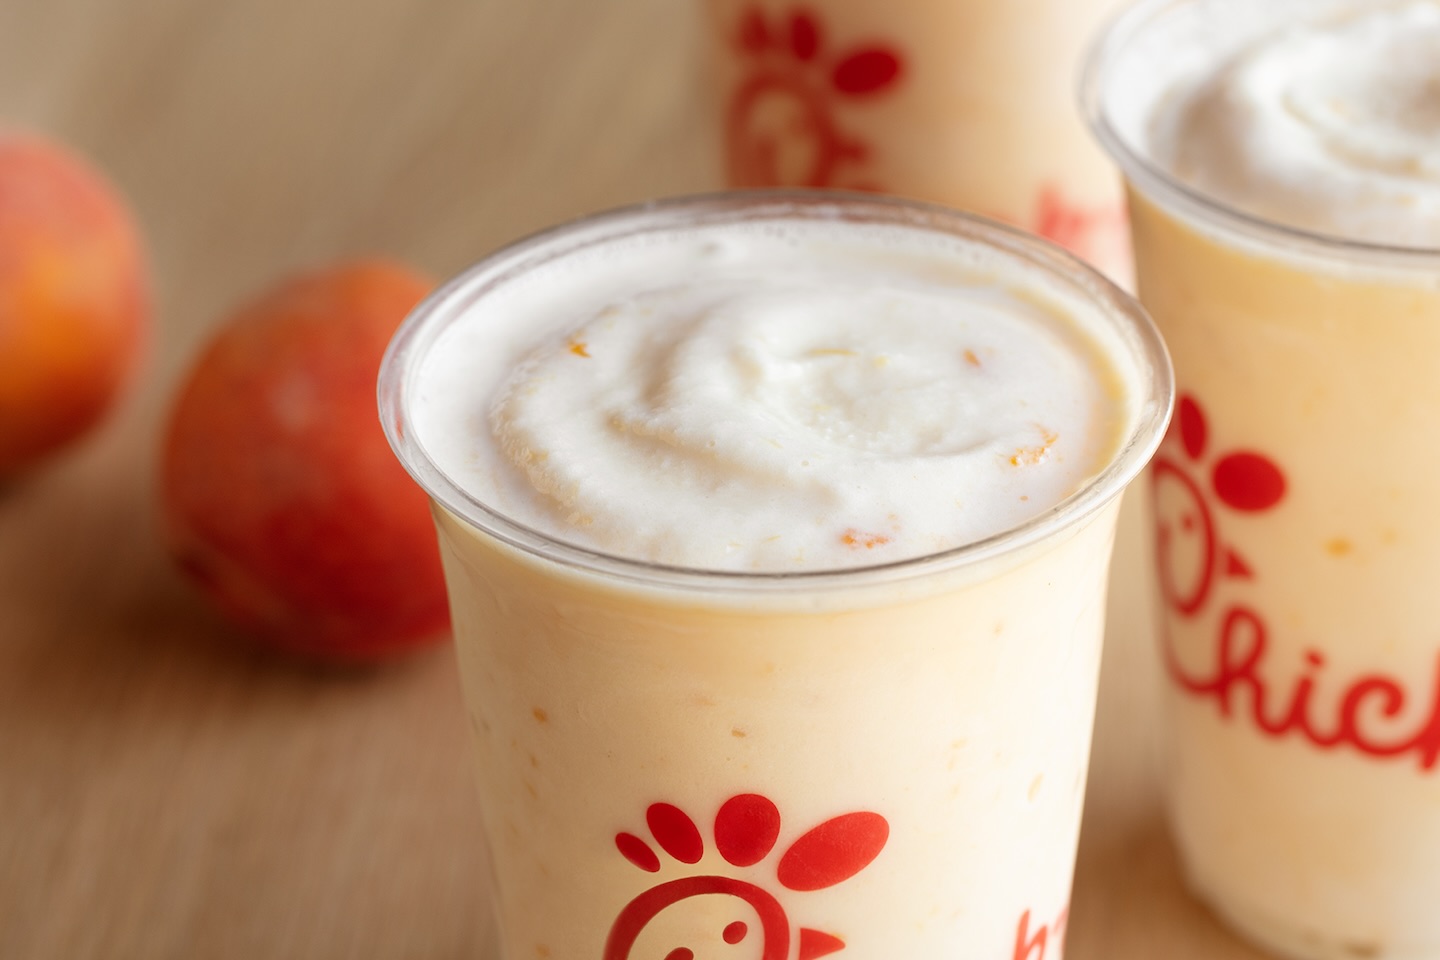 Chick-fil-A Peach Milkshakes sitting on table with peaches in background.